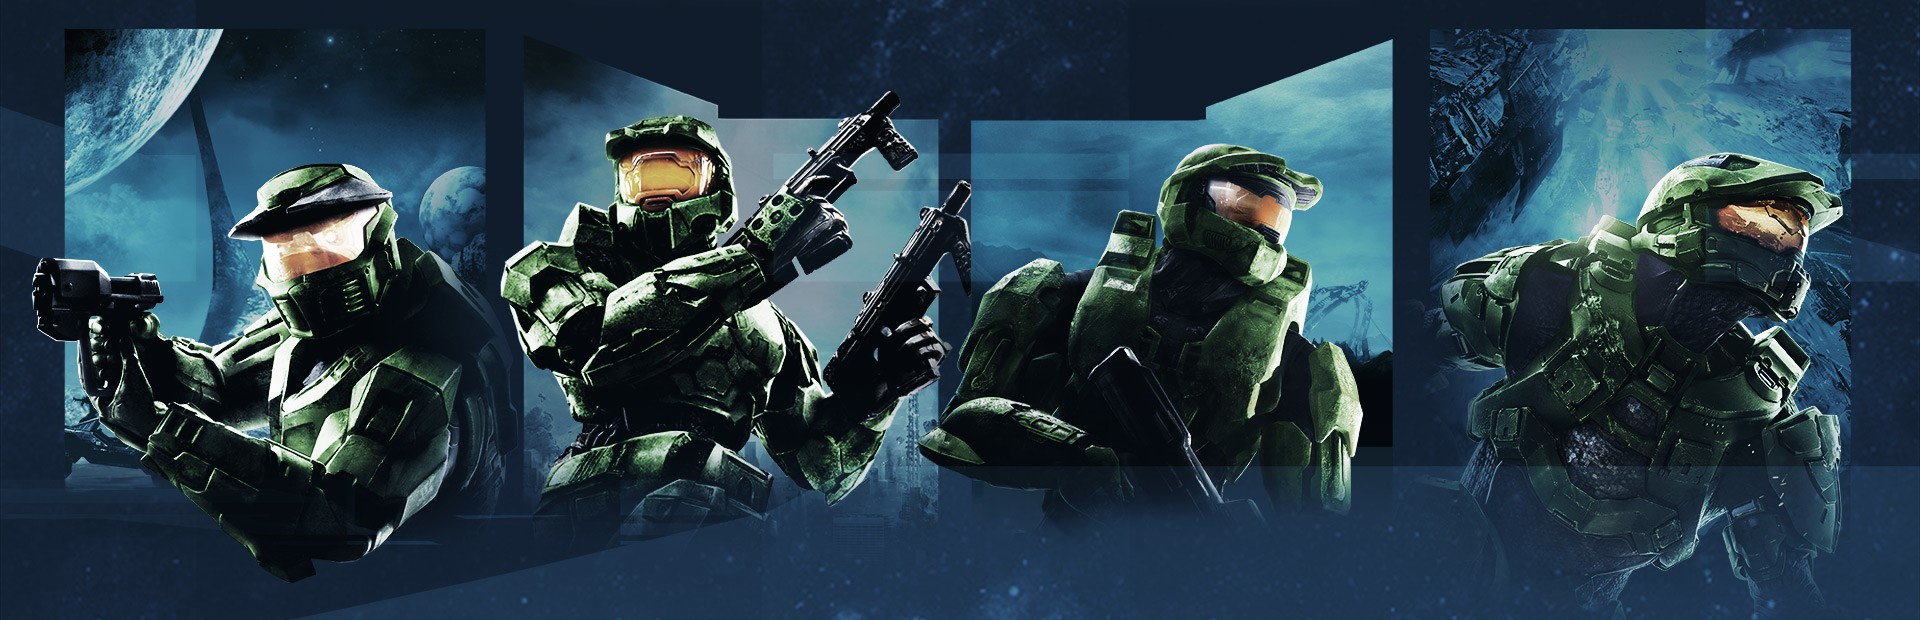 Halo the master chief collection steam фото 59